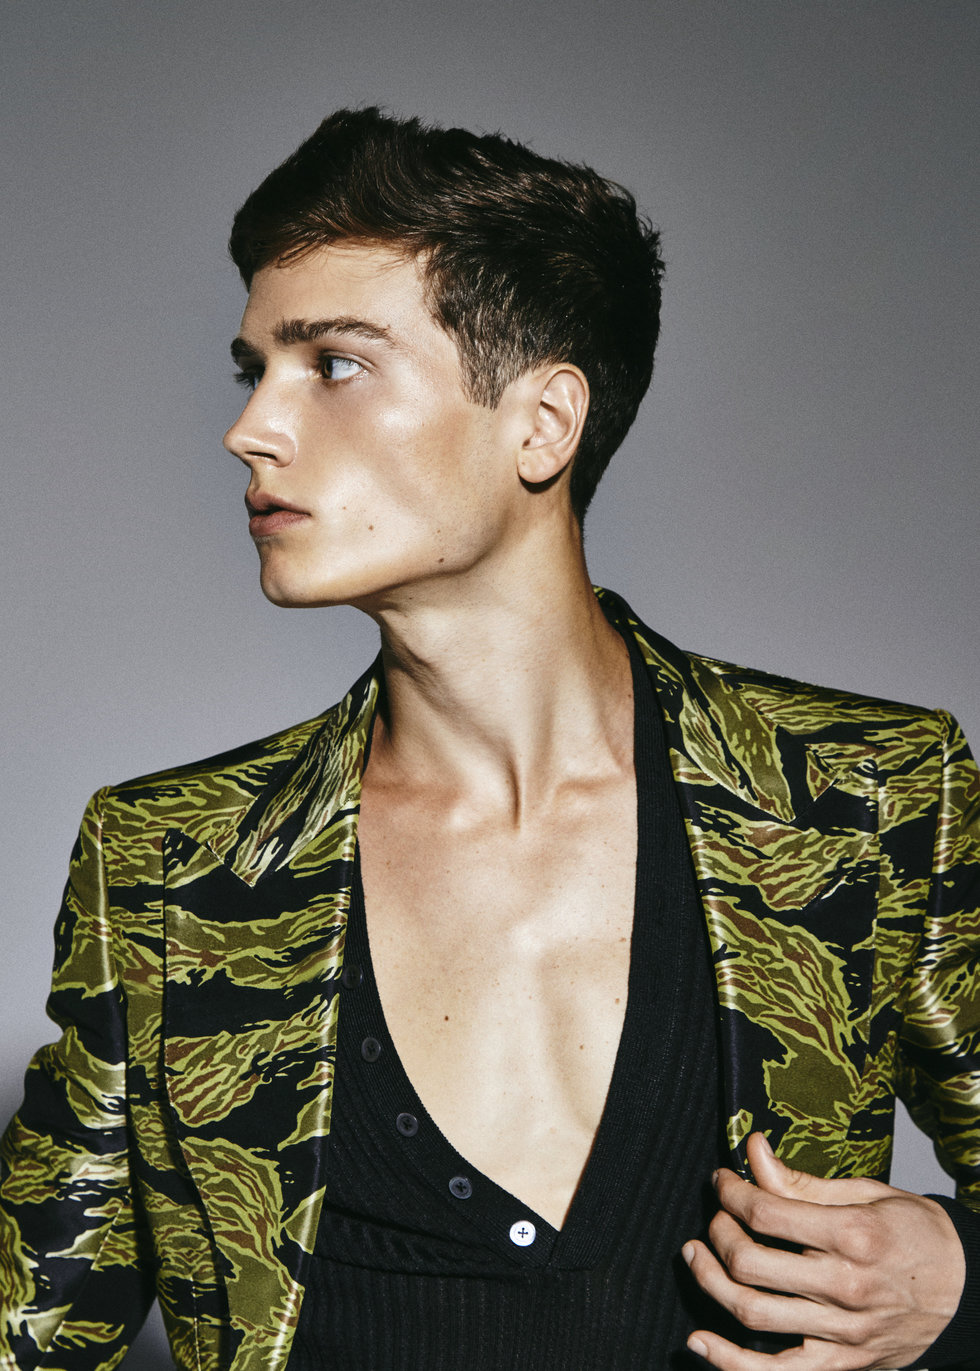 Paper Magazine's Packing Heat by Greg Vaughan